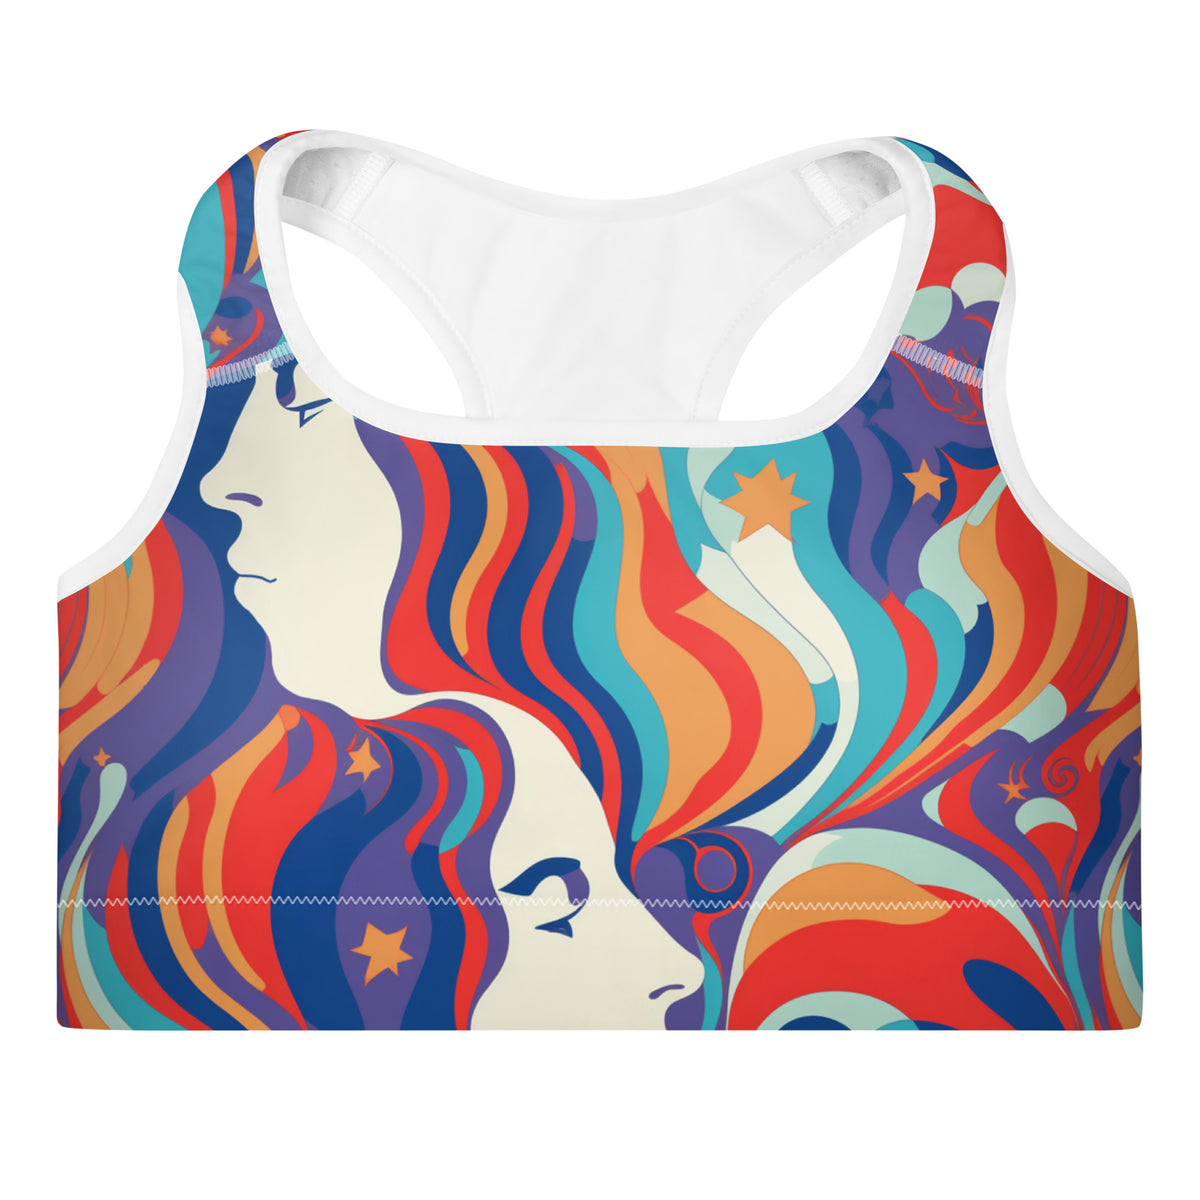 Glaser Psychedelic Woman Padded Sports Bra